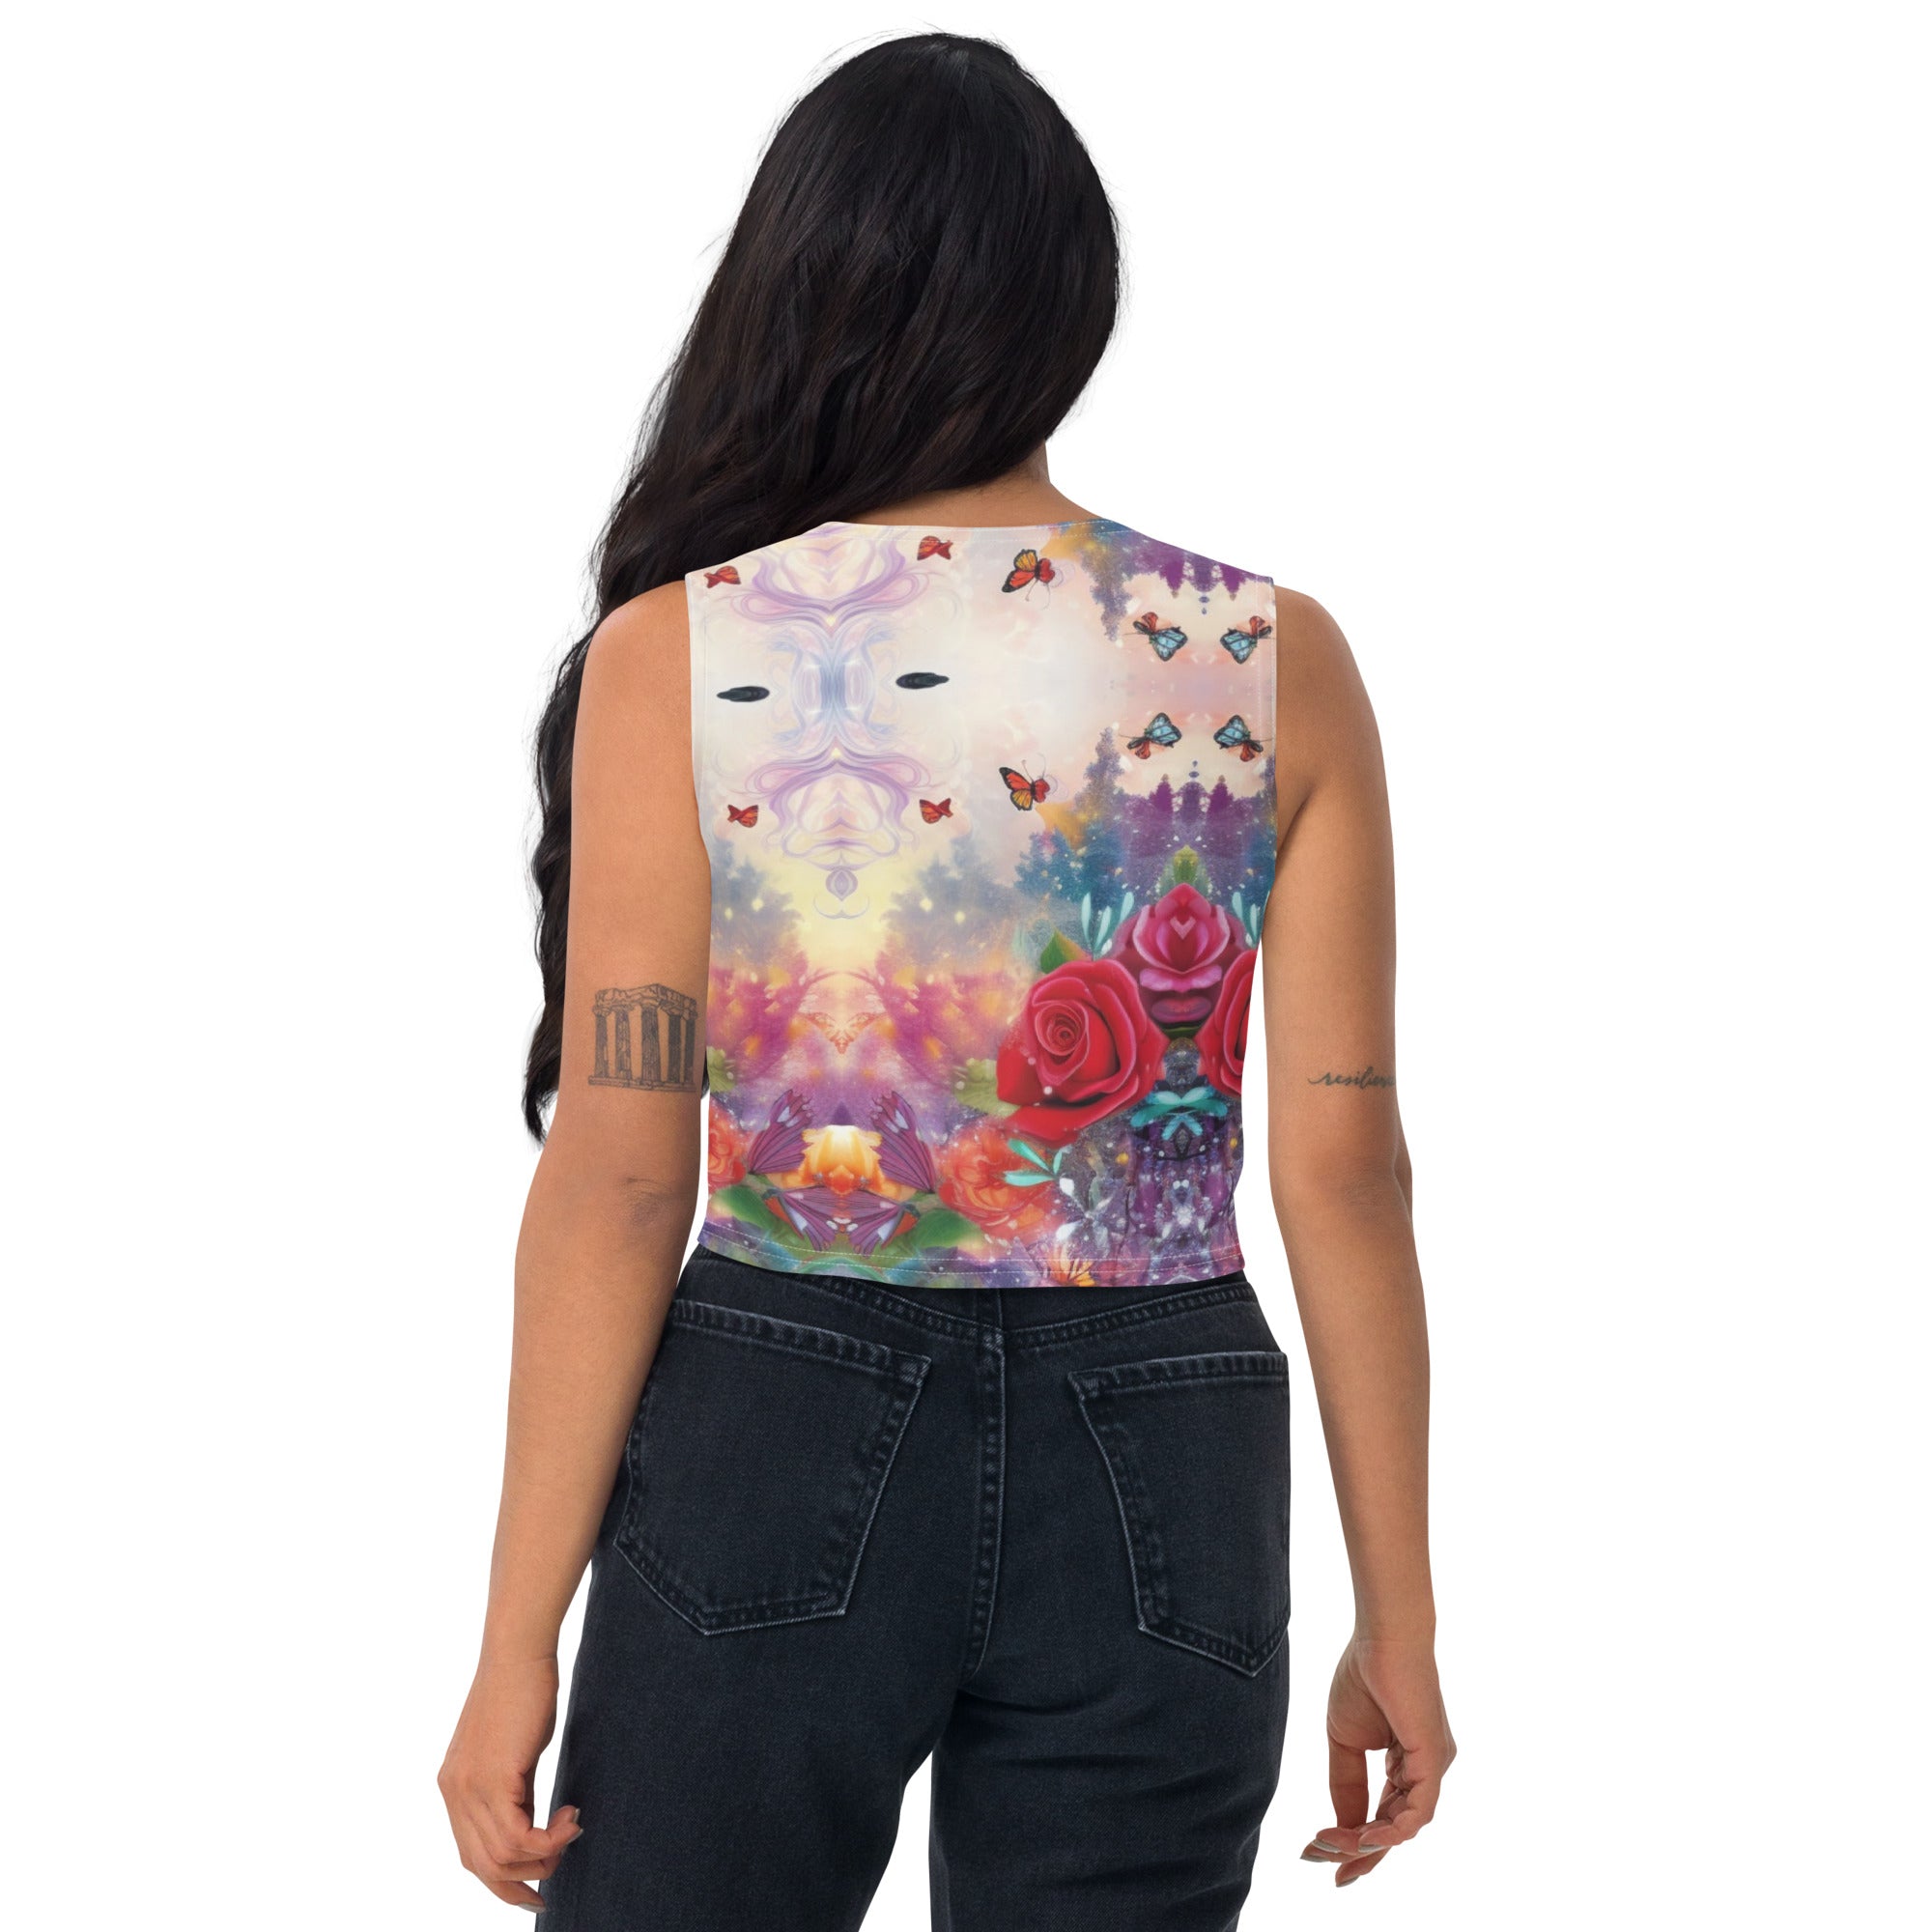 Blossom with Style in our Flower Fairy Crop Top | Girl Crop Top | Women Crop Top | Girls Night Shirt | Party Shirt | Flower Fairy Shirt